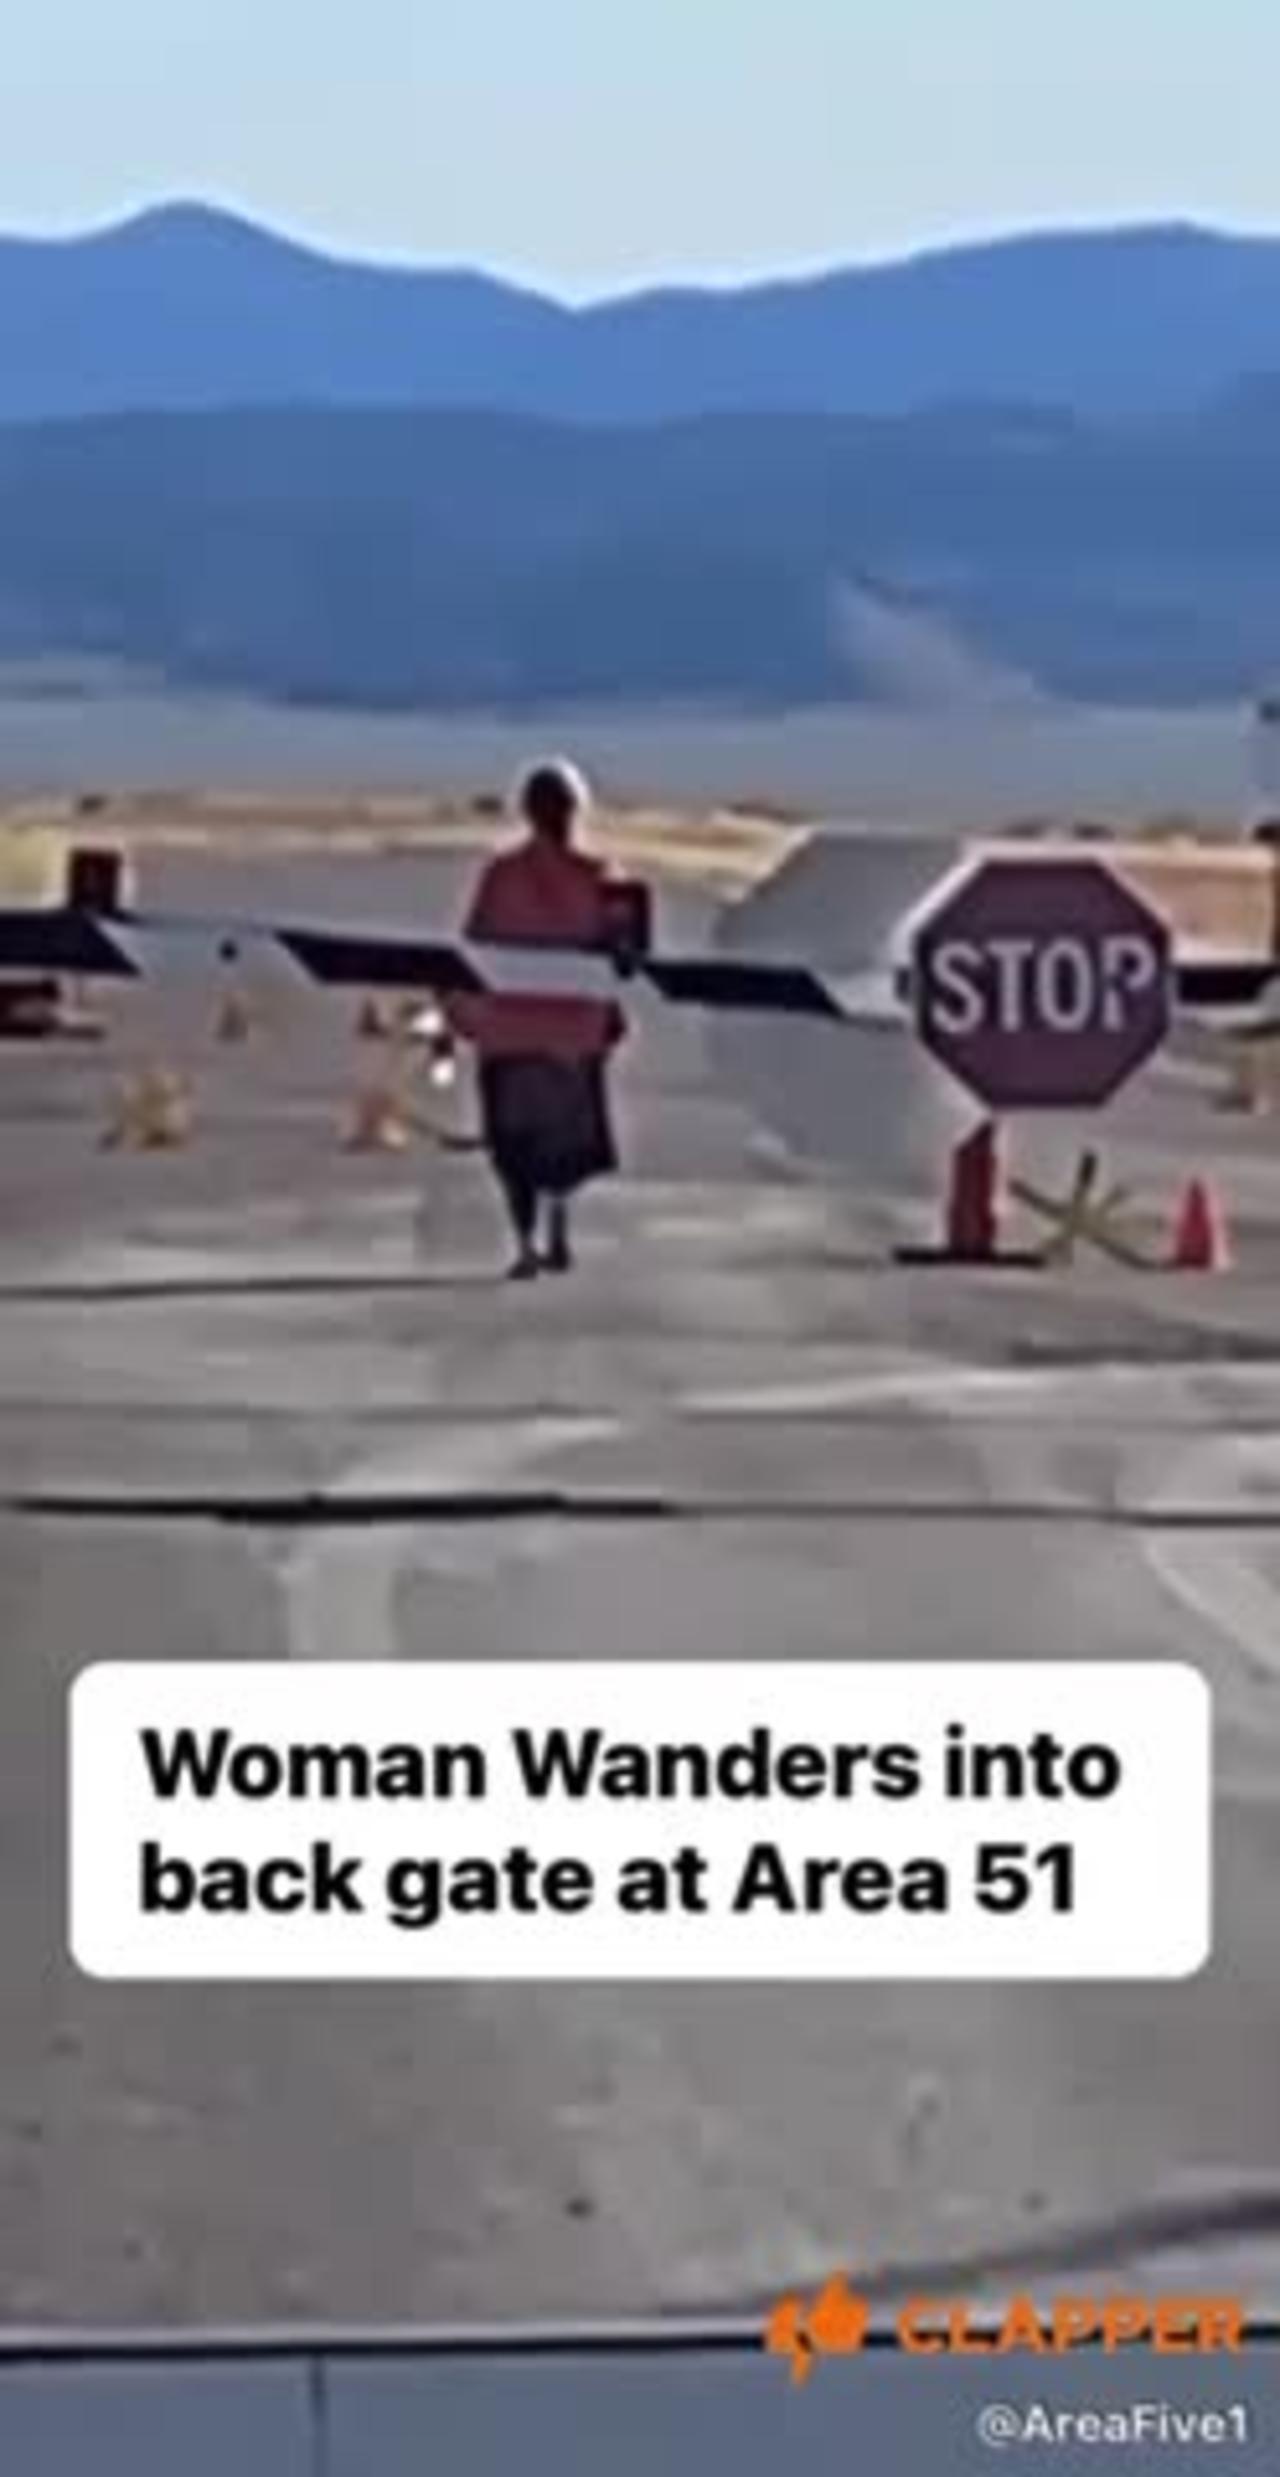 Women wanders into back gate at Area 51